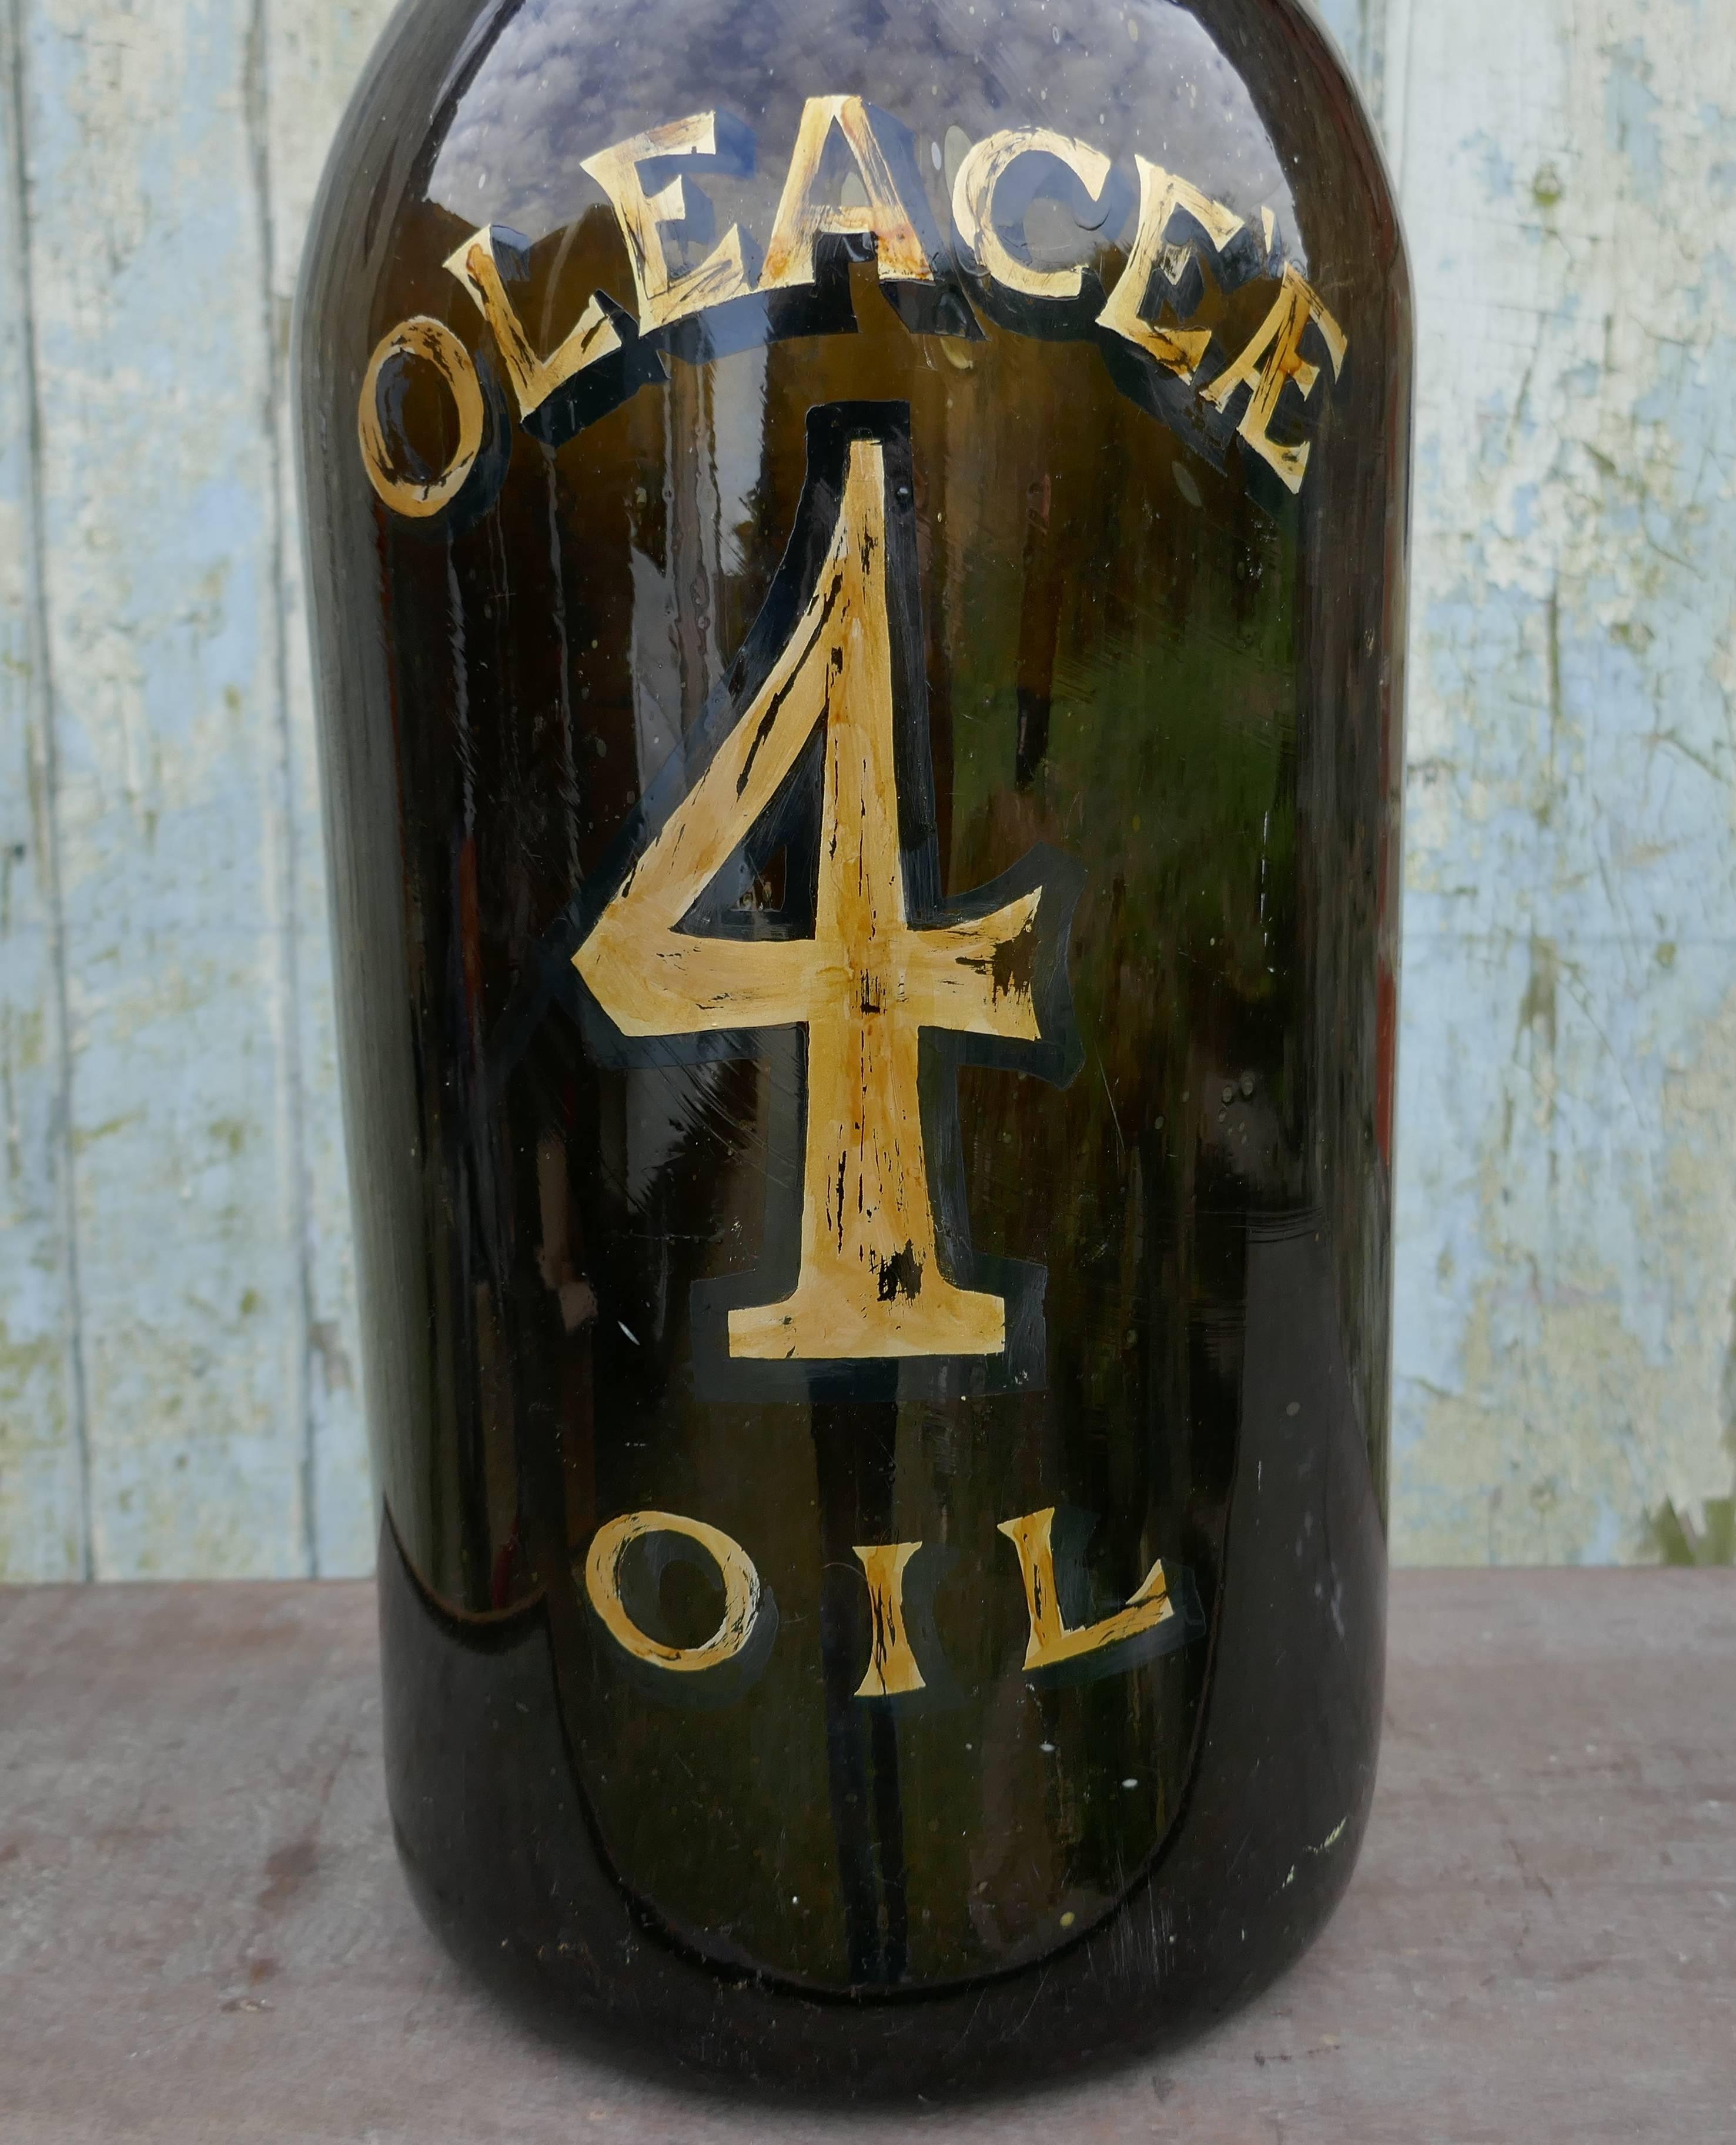 This is a super display piece, the bottle is made in brown glass, on the front it has the number 4 and OLEACEE OIL in Gold
The bottle is in god condition with only minor scuffing and they gold writing is in good condition
Measures: The bottle is